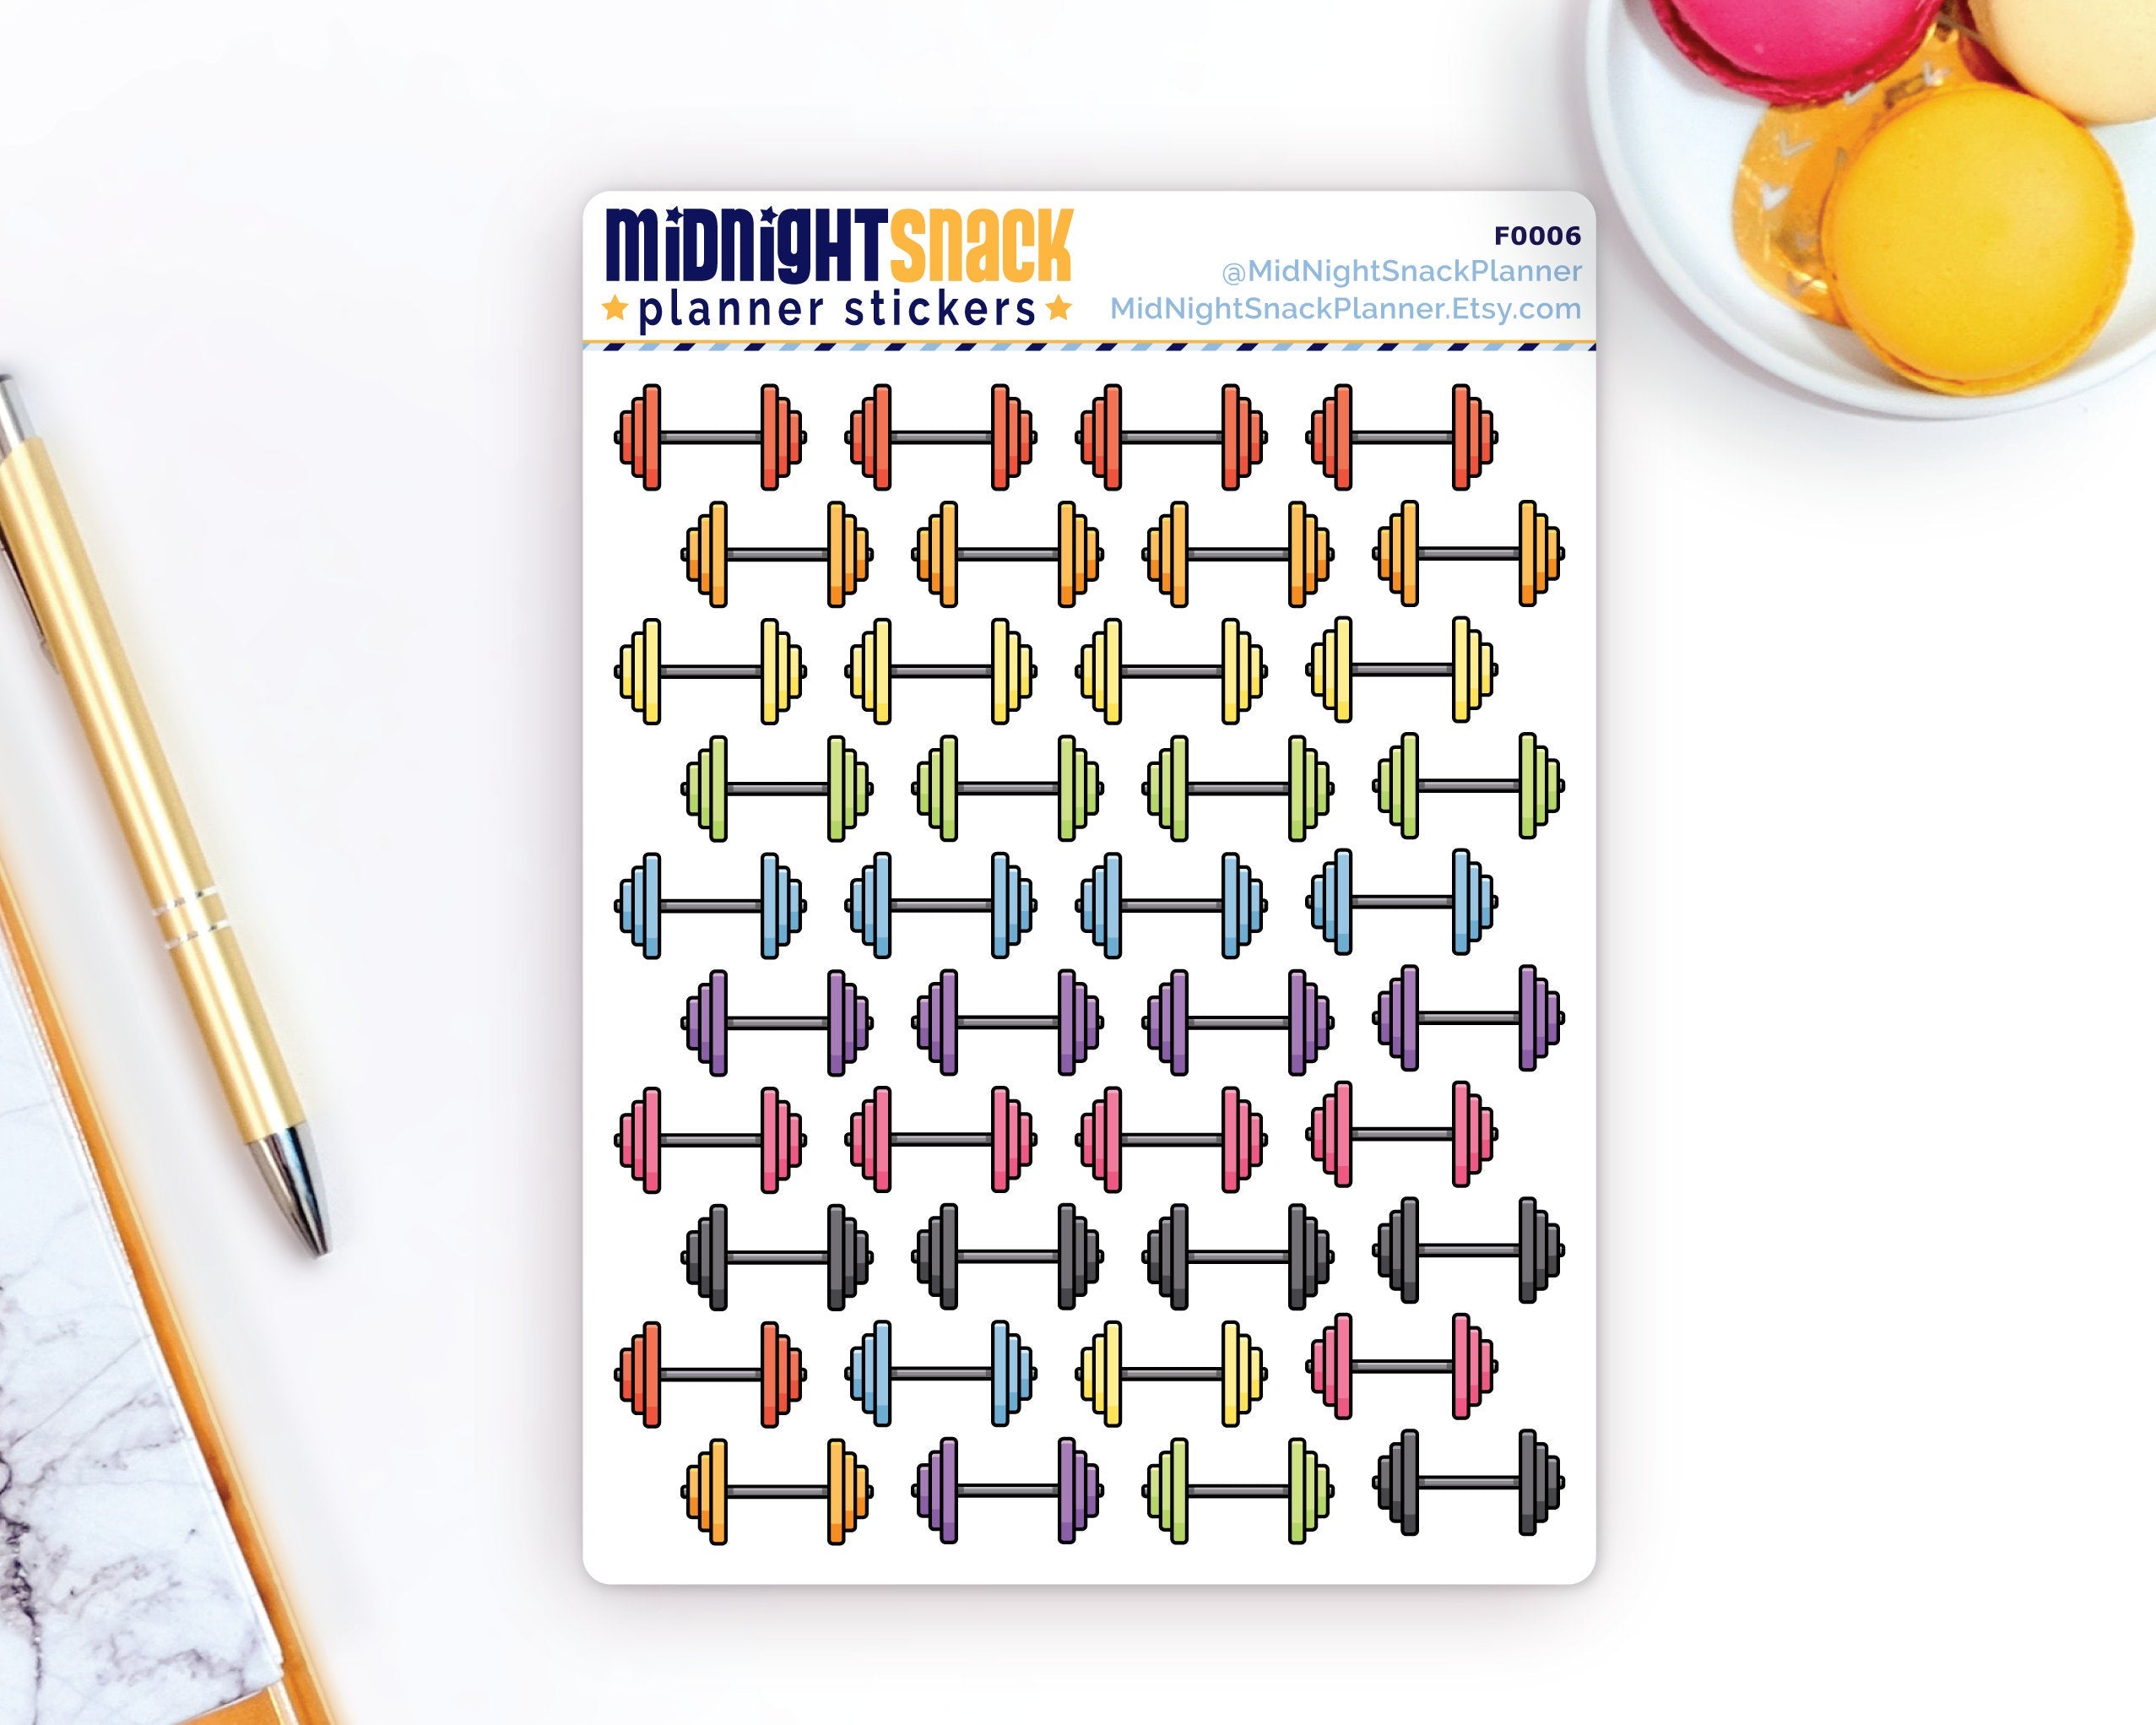 Dumbbell Weights Icon: Strength Training Fitness Planner Stickers Midnight Snack Planner